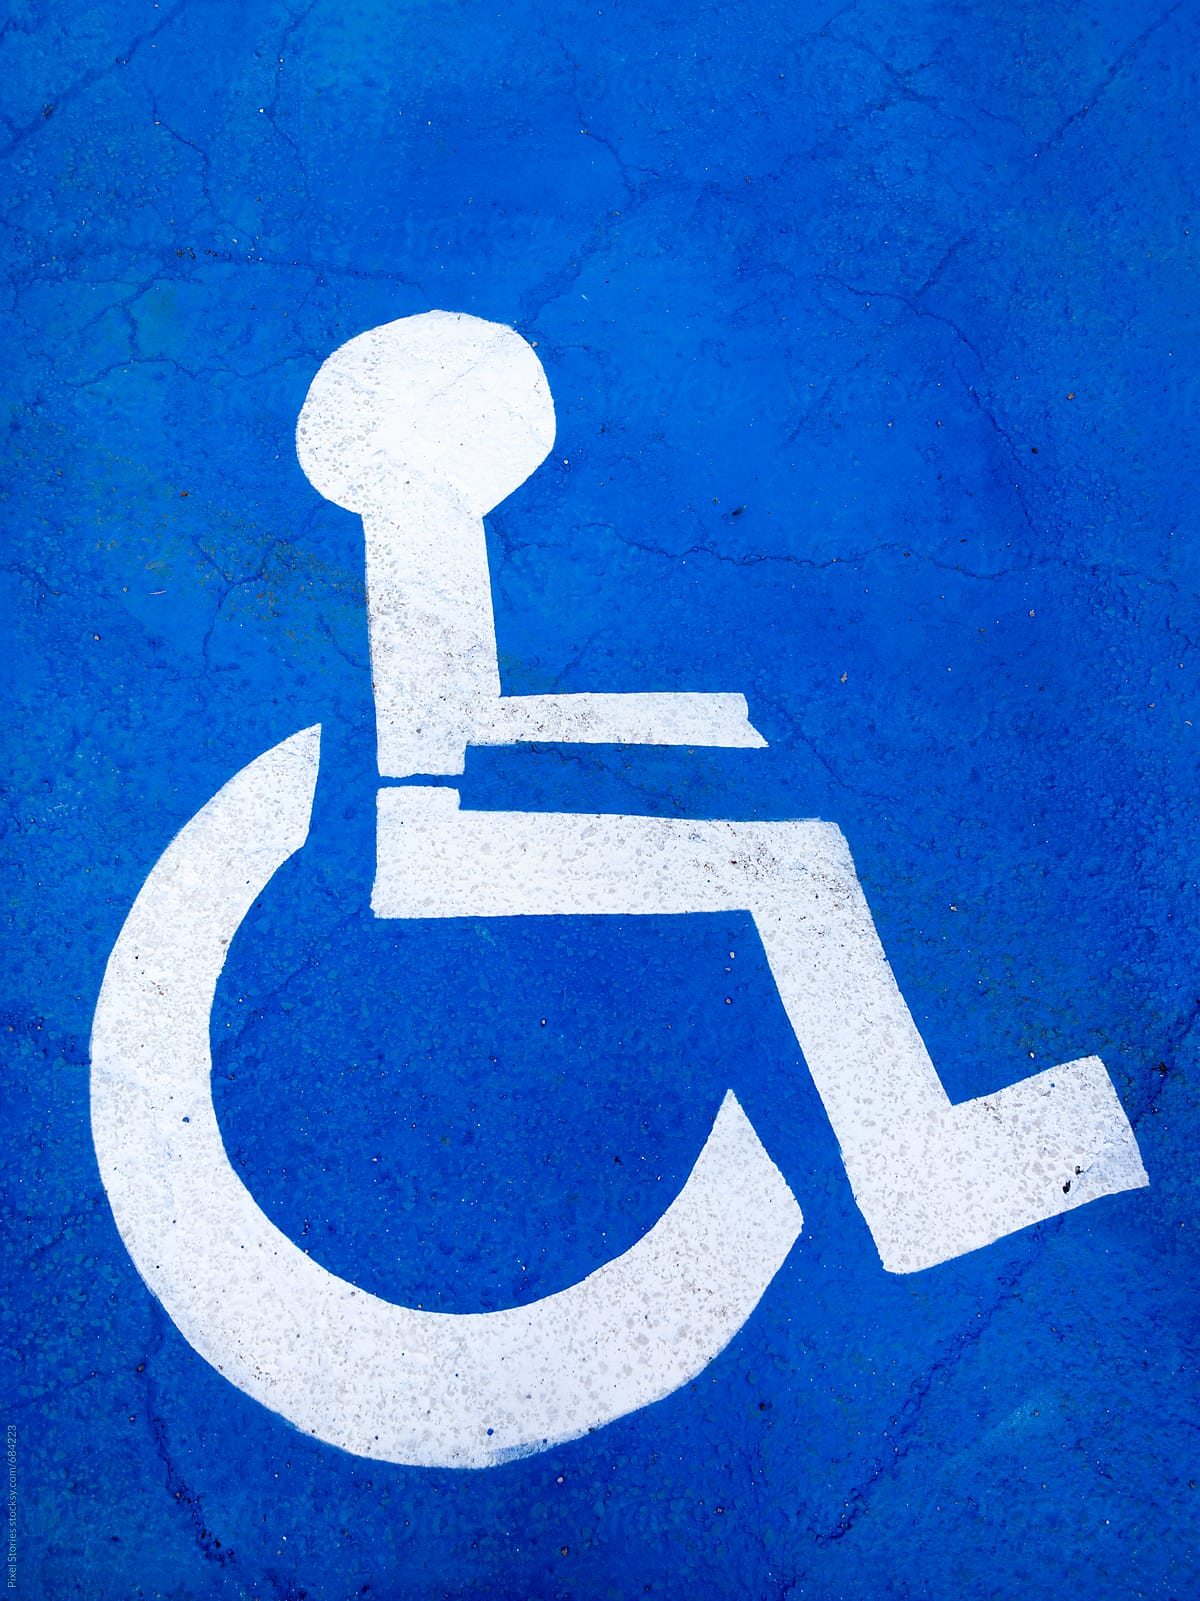 Parking space for the disabled